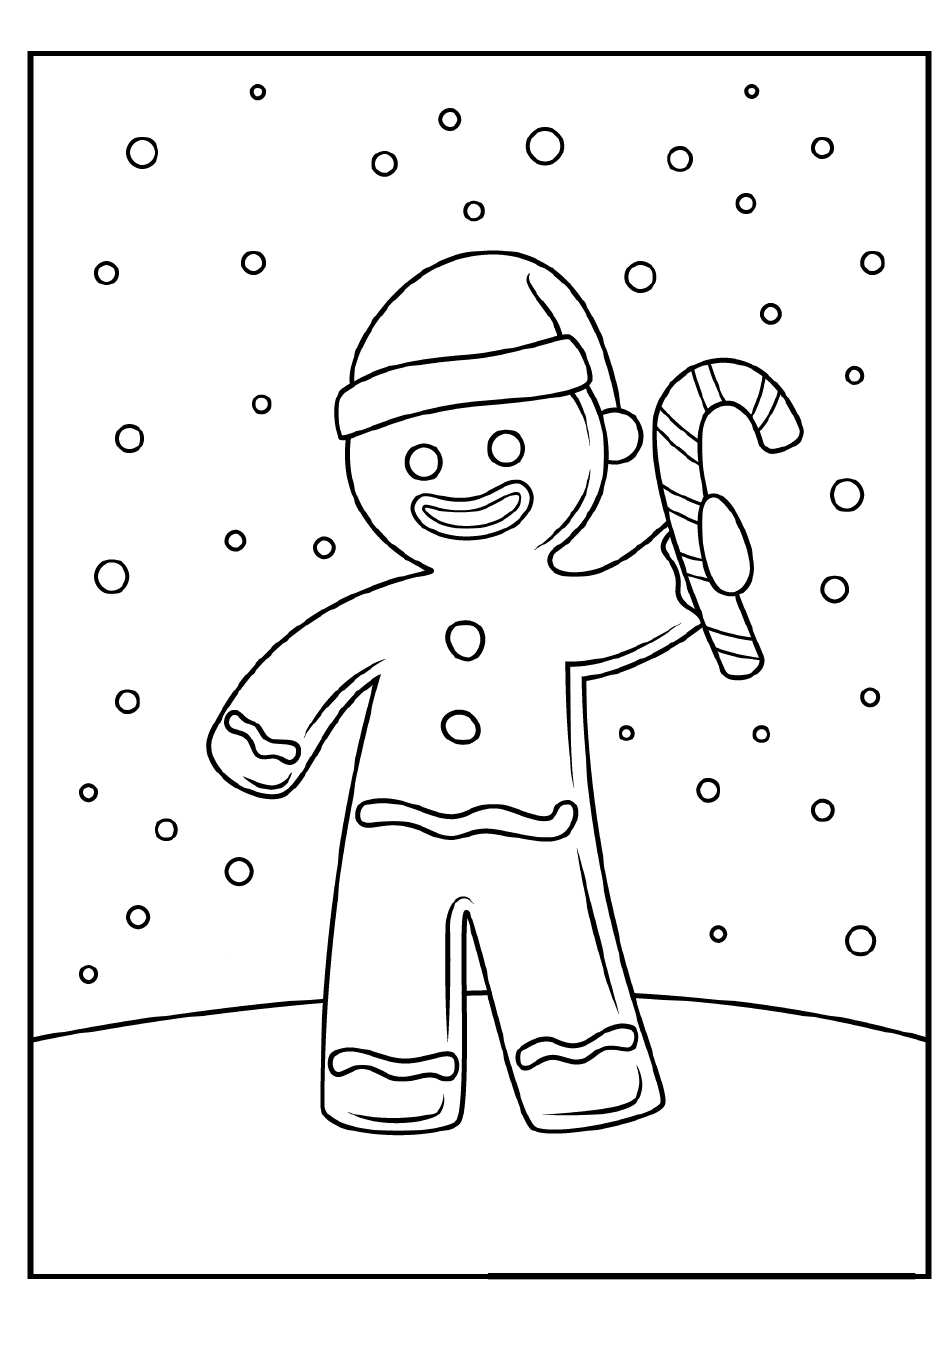 Gingerbread Man Coloring Page - Snow, Page 1